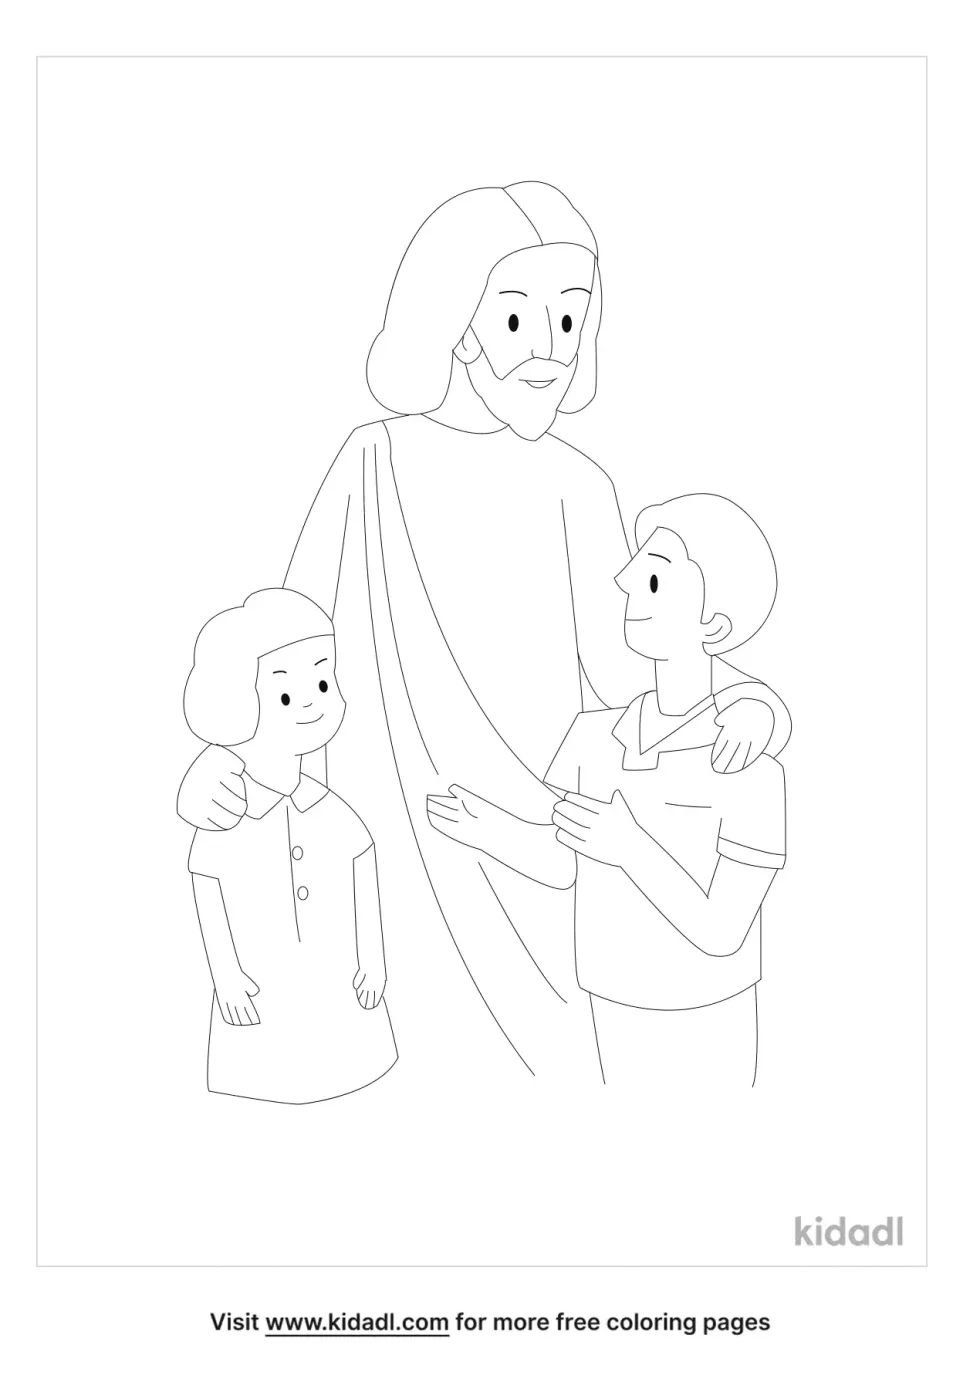 Telling Others About Jesus Coloring Page